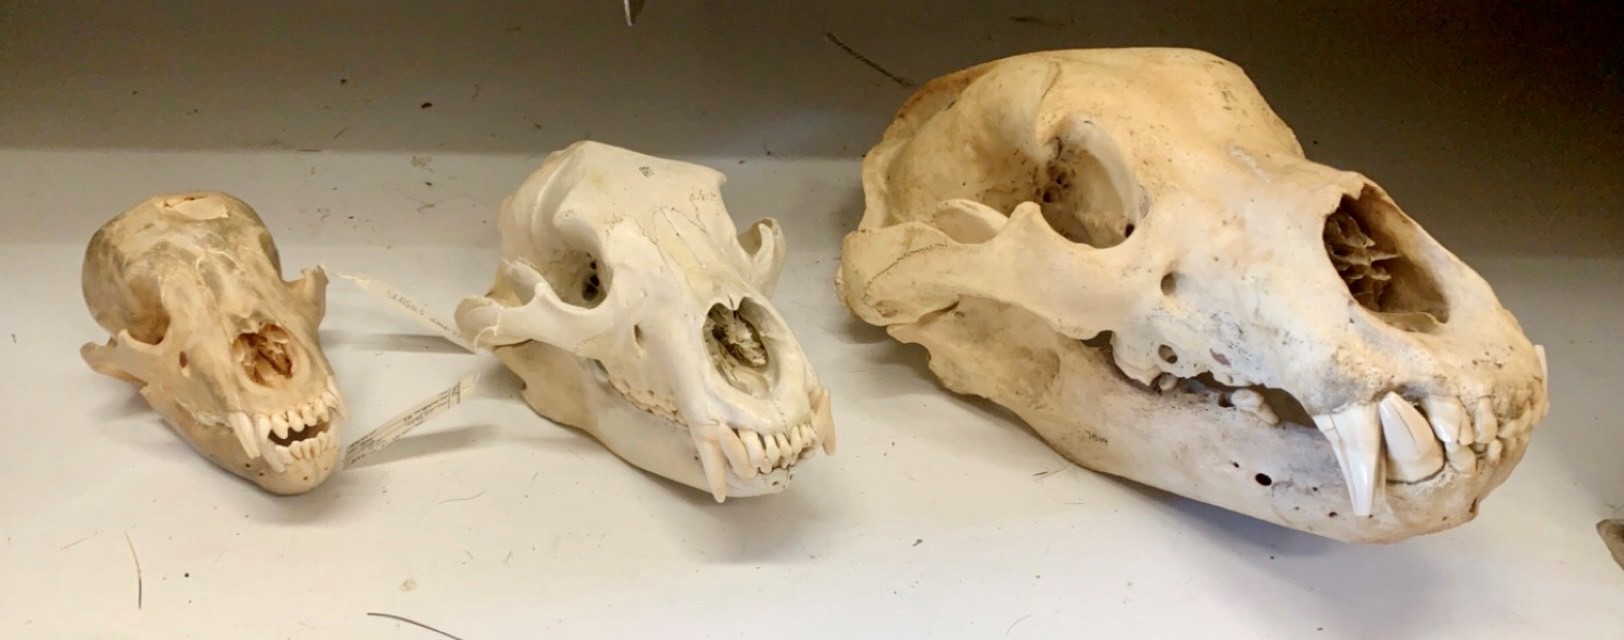 grizzly skulls